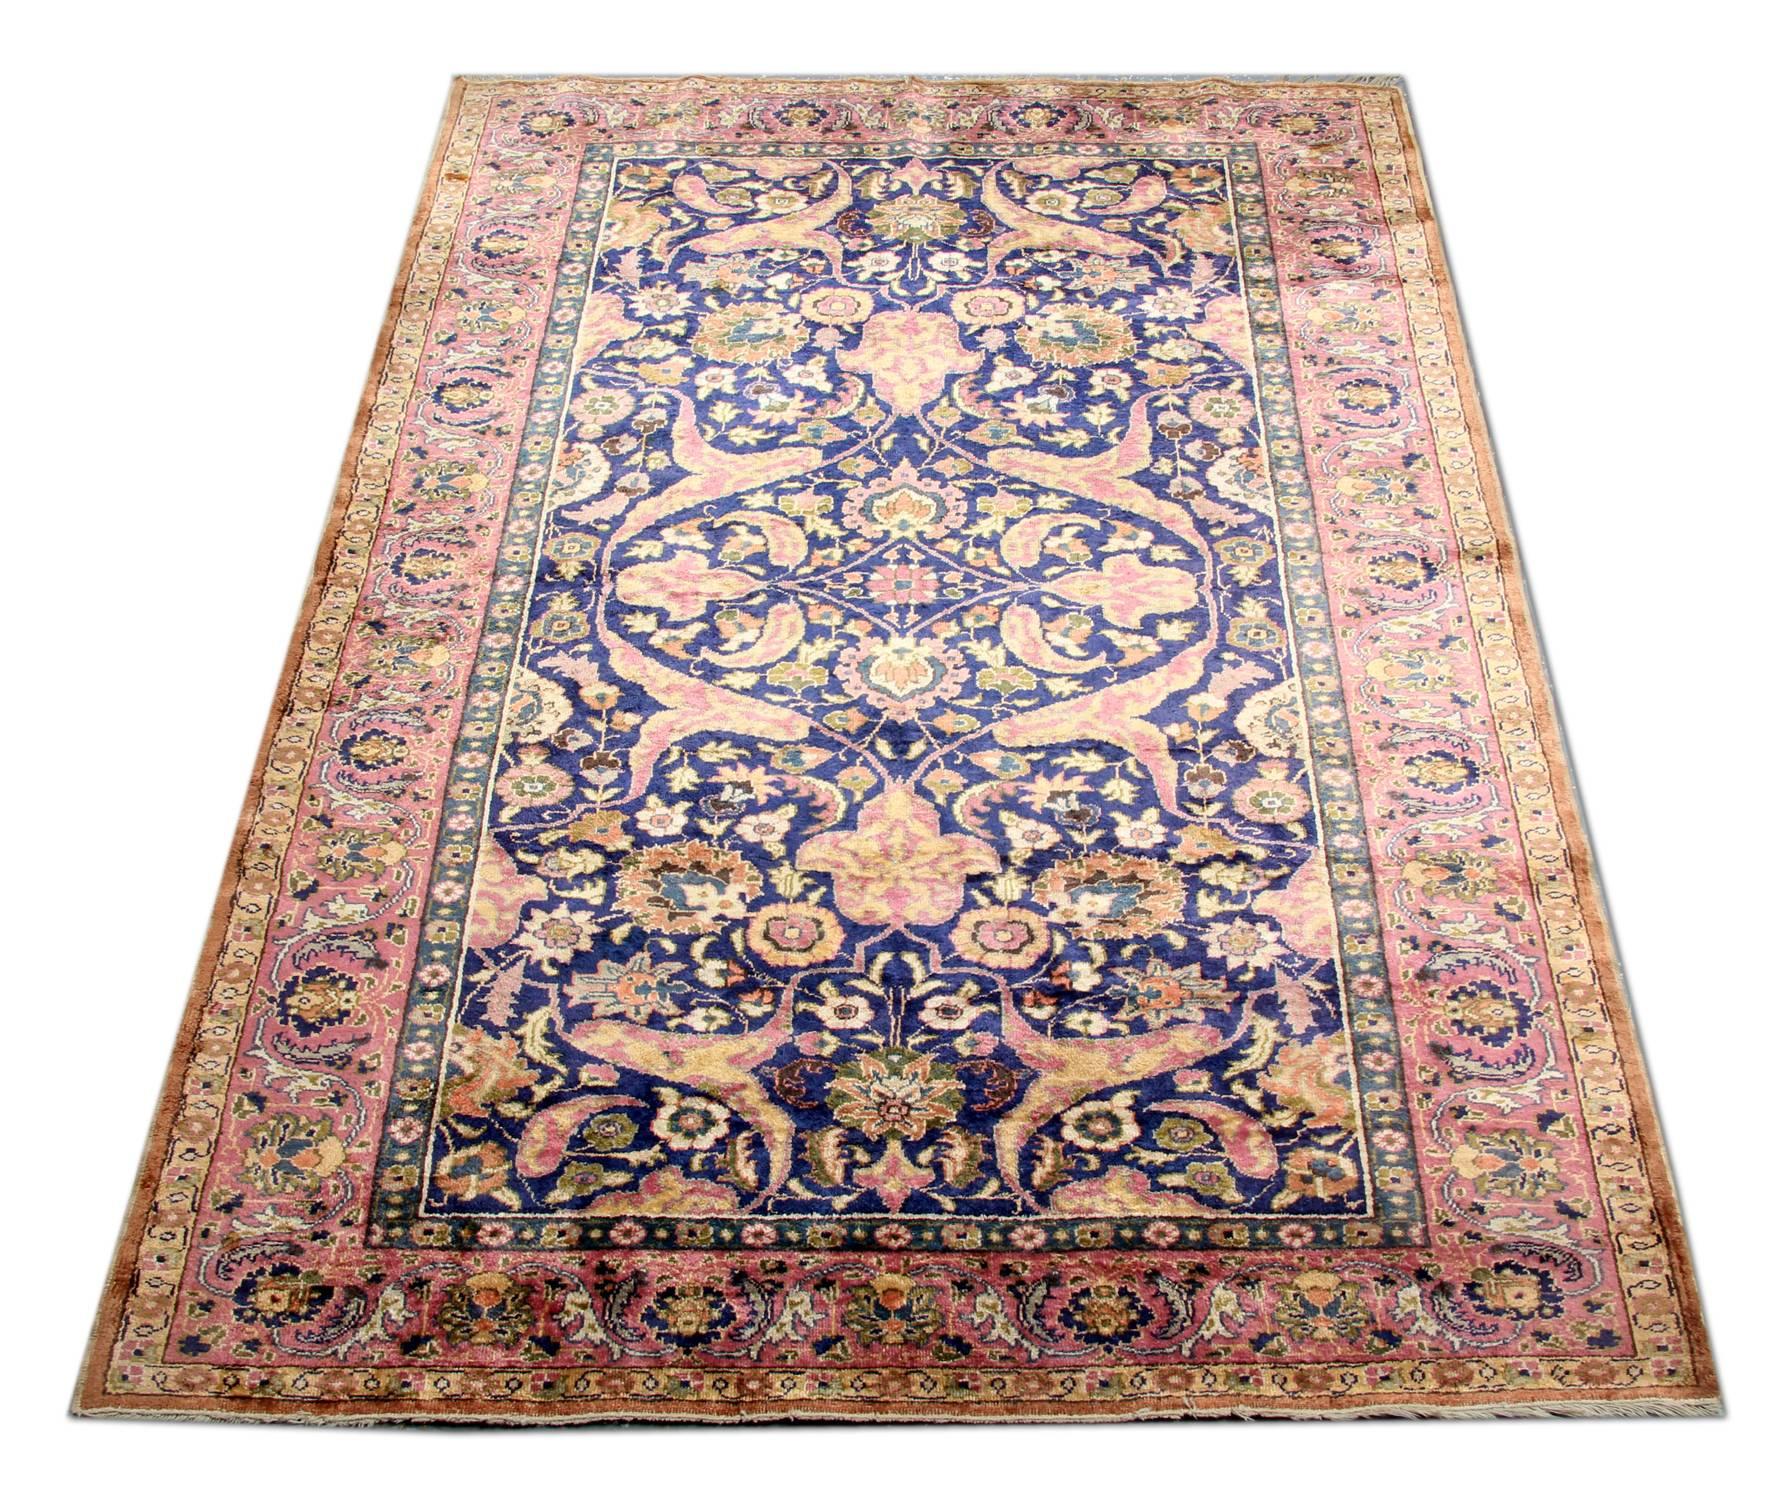 This is an example of handmade carpet finely hand-knotted vintage rugs from Central Anatolia with a Classic all-over floral rug design of small patterns. The high-quality wool pile on a strong silk foundation and excellent original condition let